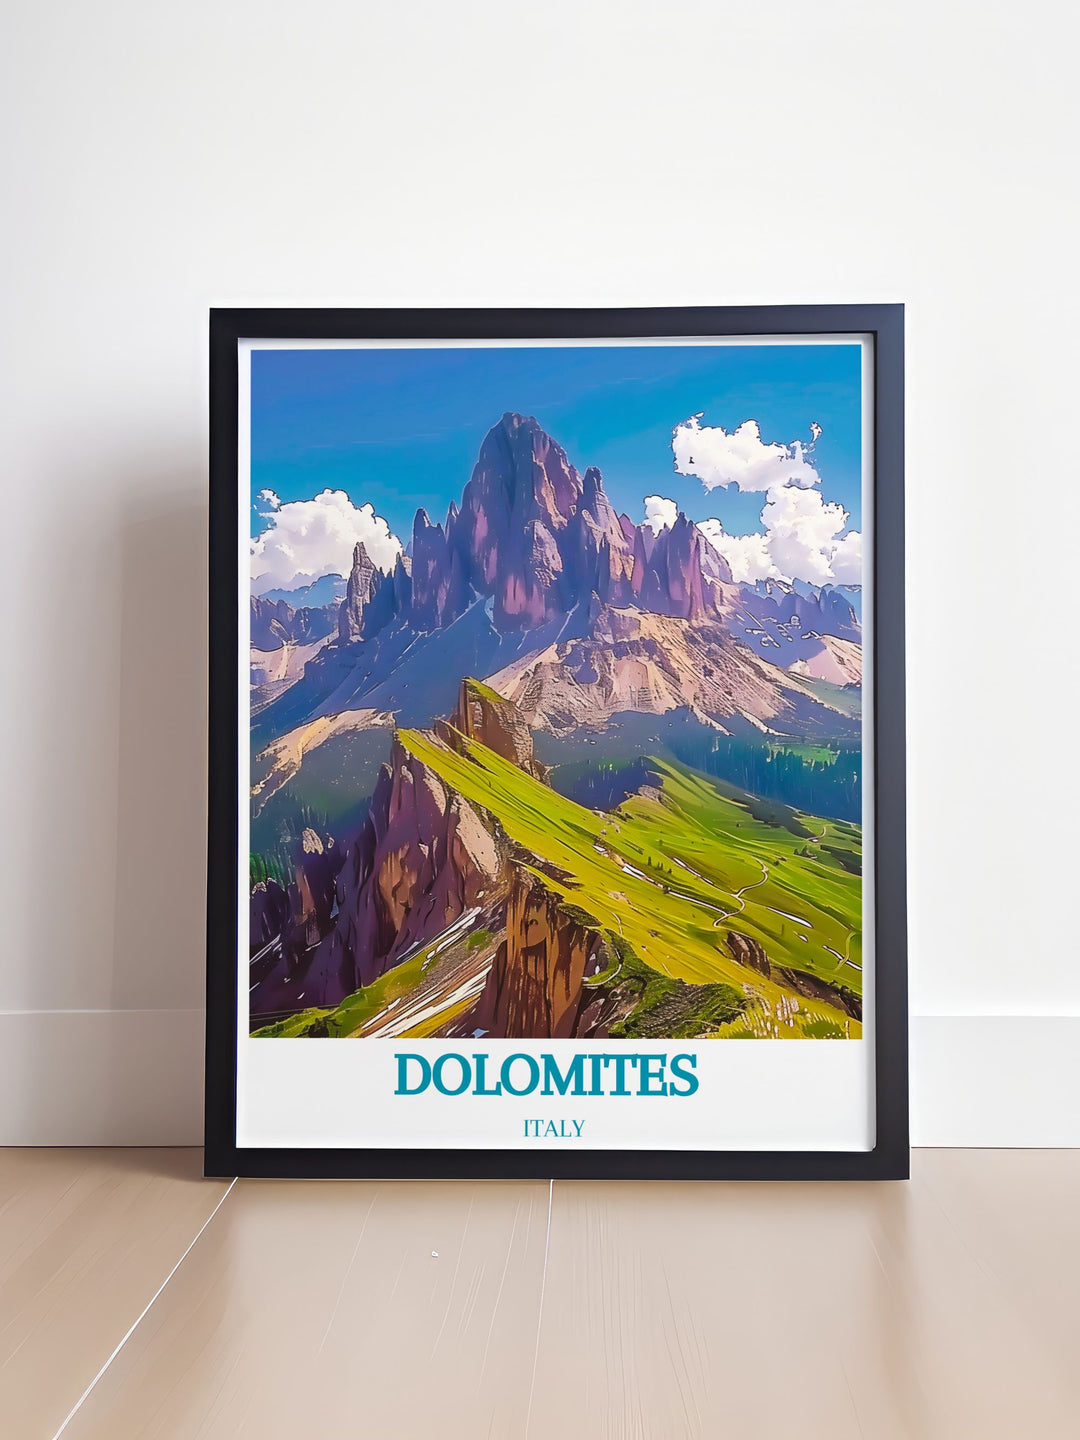 Travel poster featuring the scenic beauty of Seceda, highlighting the distinctive peaks and breathtaking views of Italy’s Dolomites.